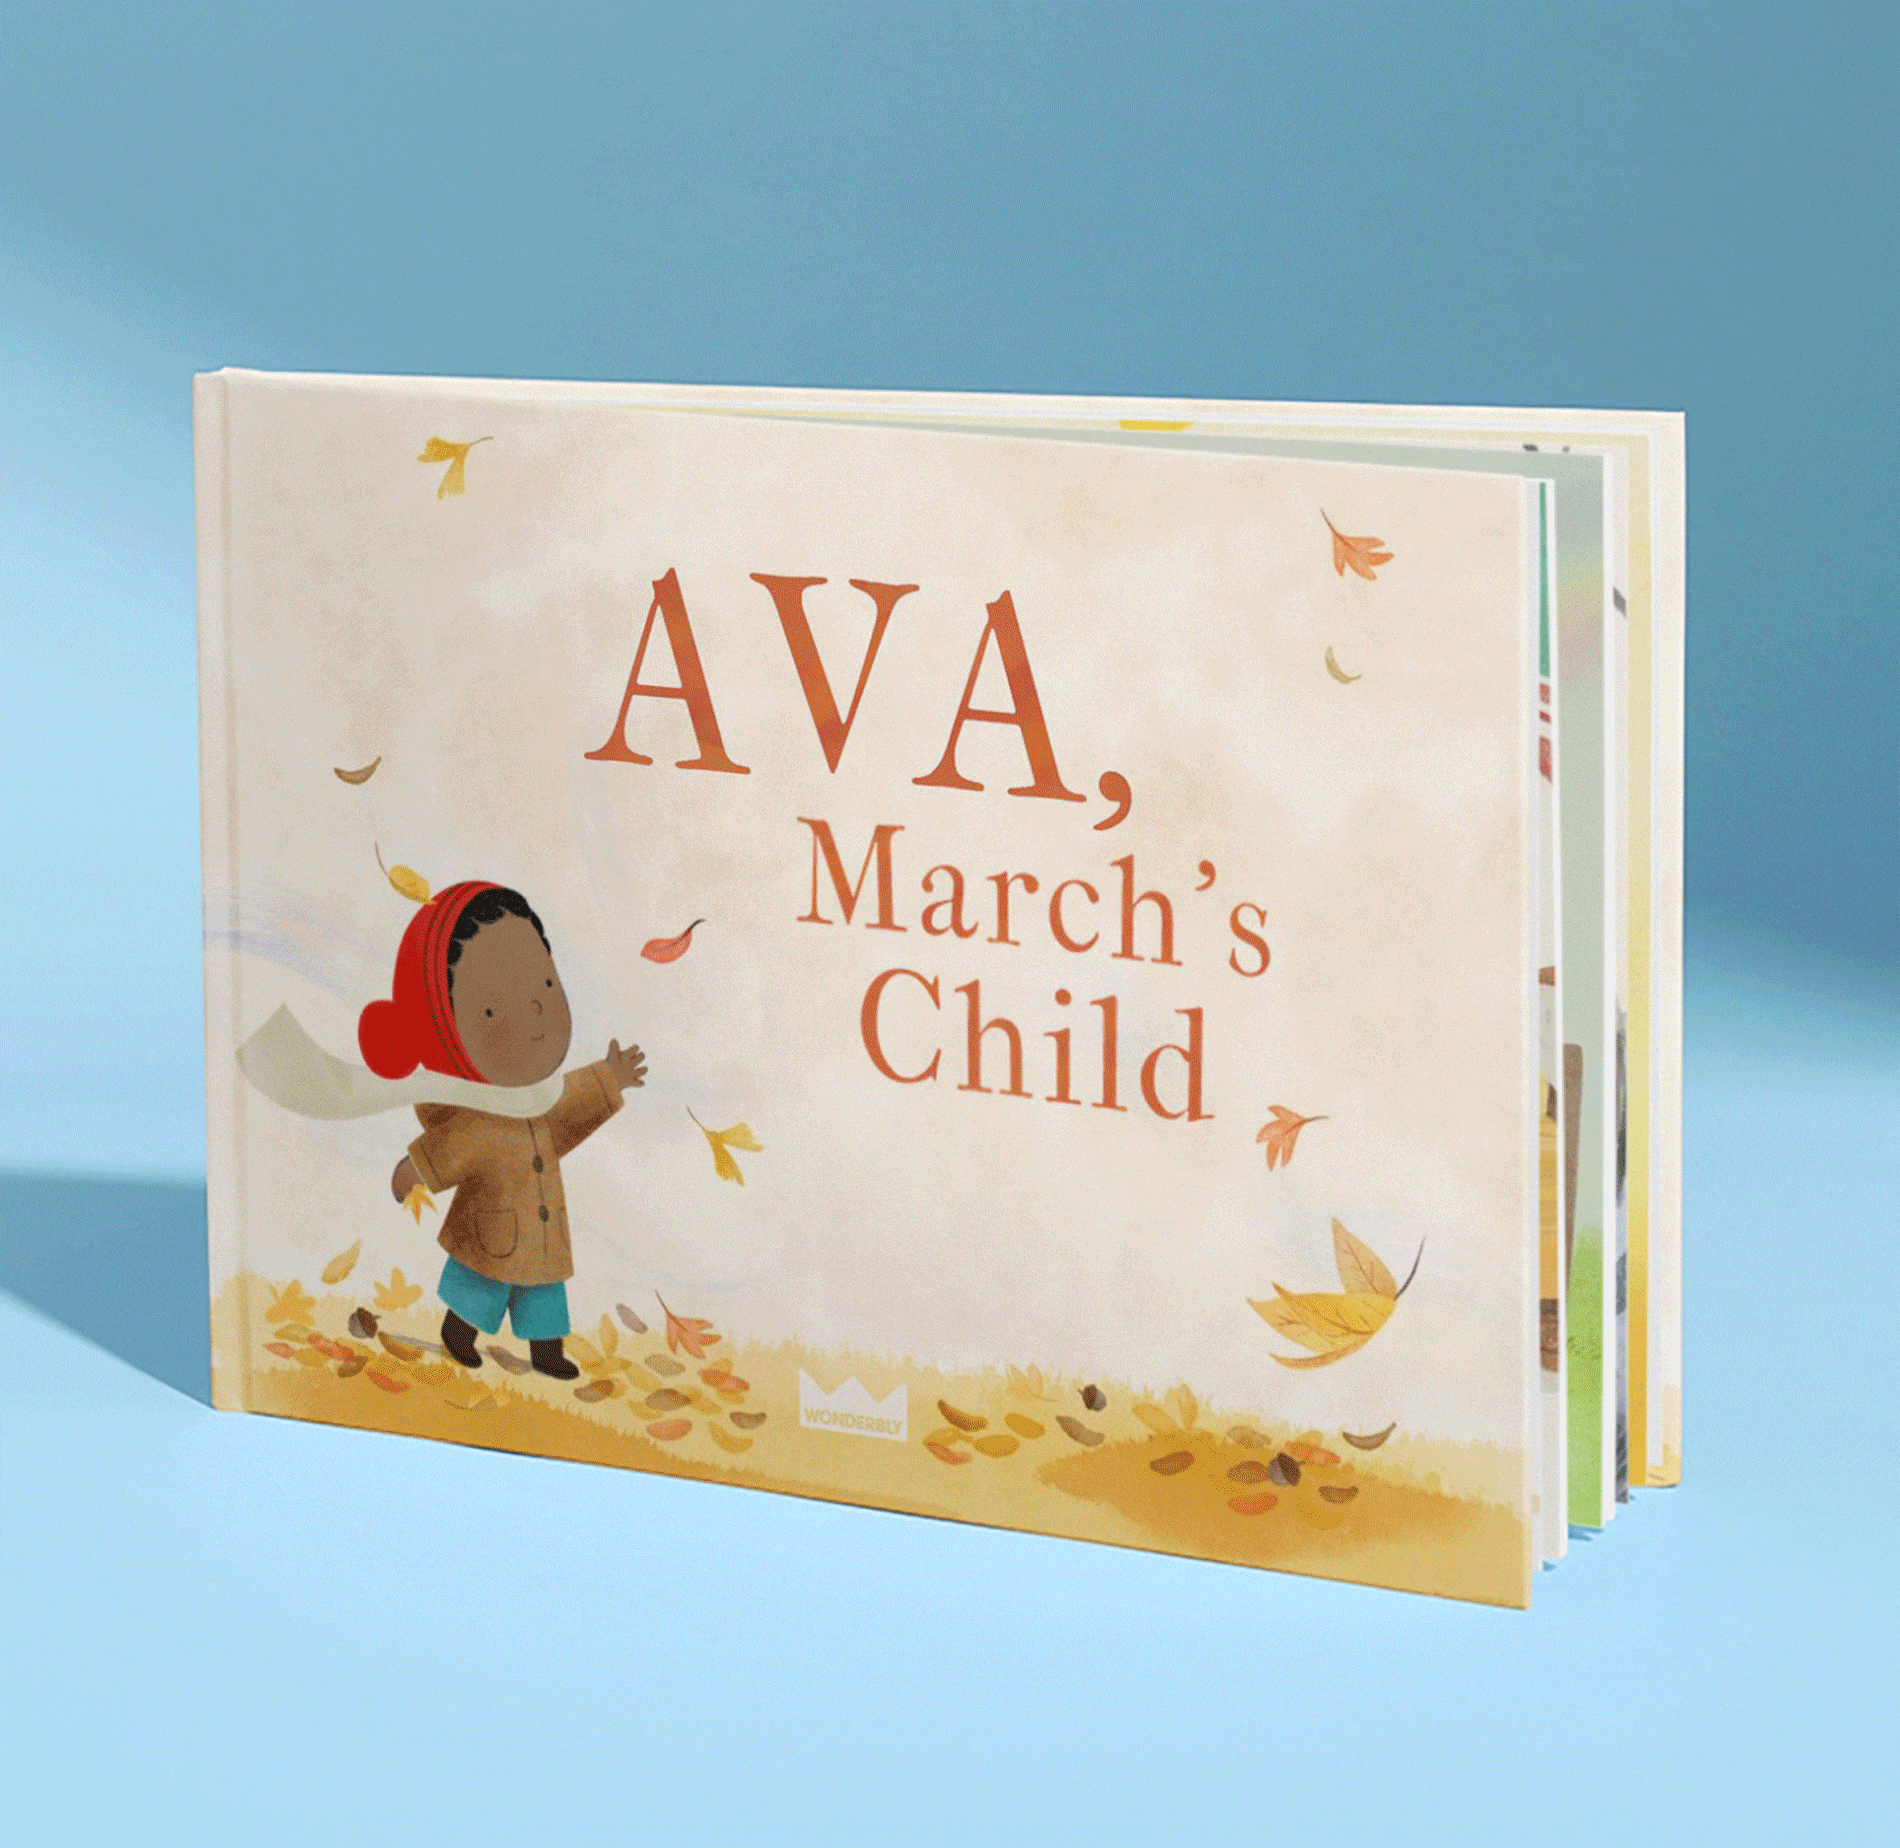 Gif displaying different book covers for Month's Child